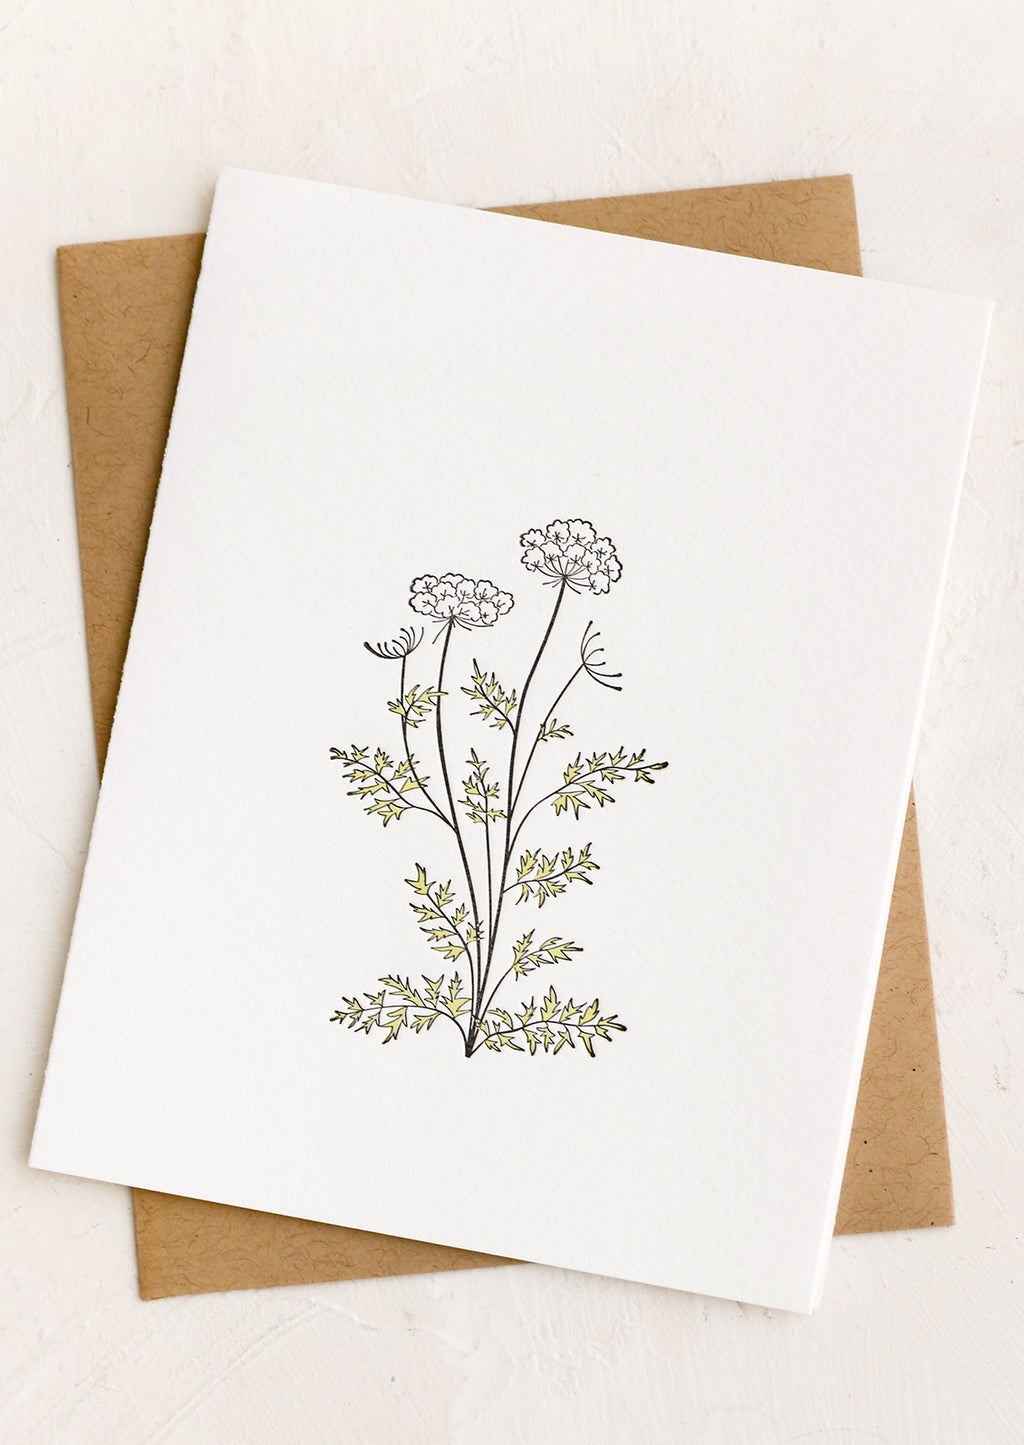 Queen Anne's Lace: A blank white card with queen anne's lace illustration.